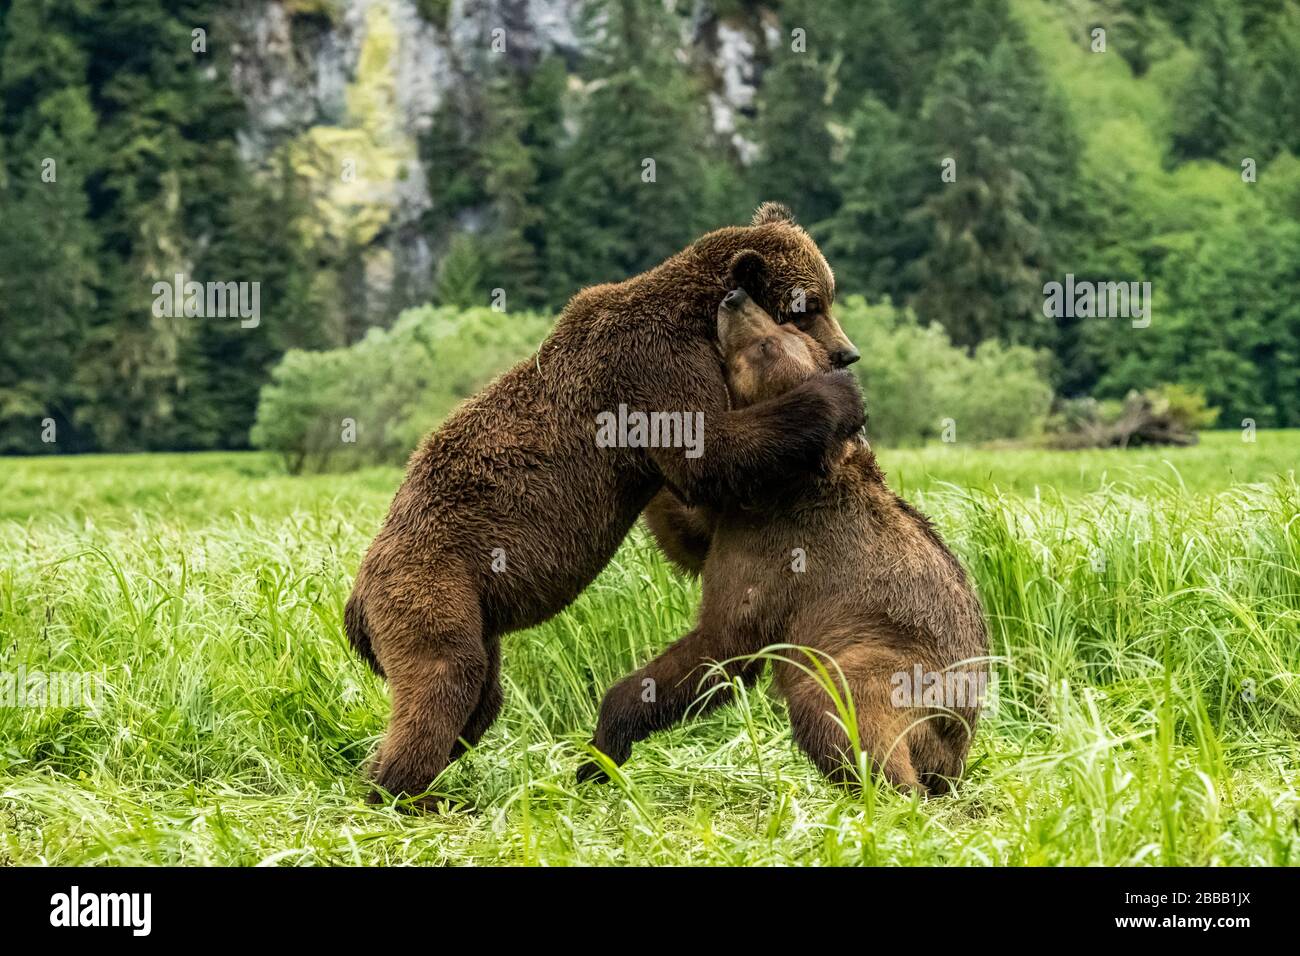 Grizzly bears (Ursus arctos horribilis) flight and playing, Khutzeymateen Grizzly Bear Sanctuary, Northern BC, Canada Stock Photo